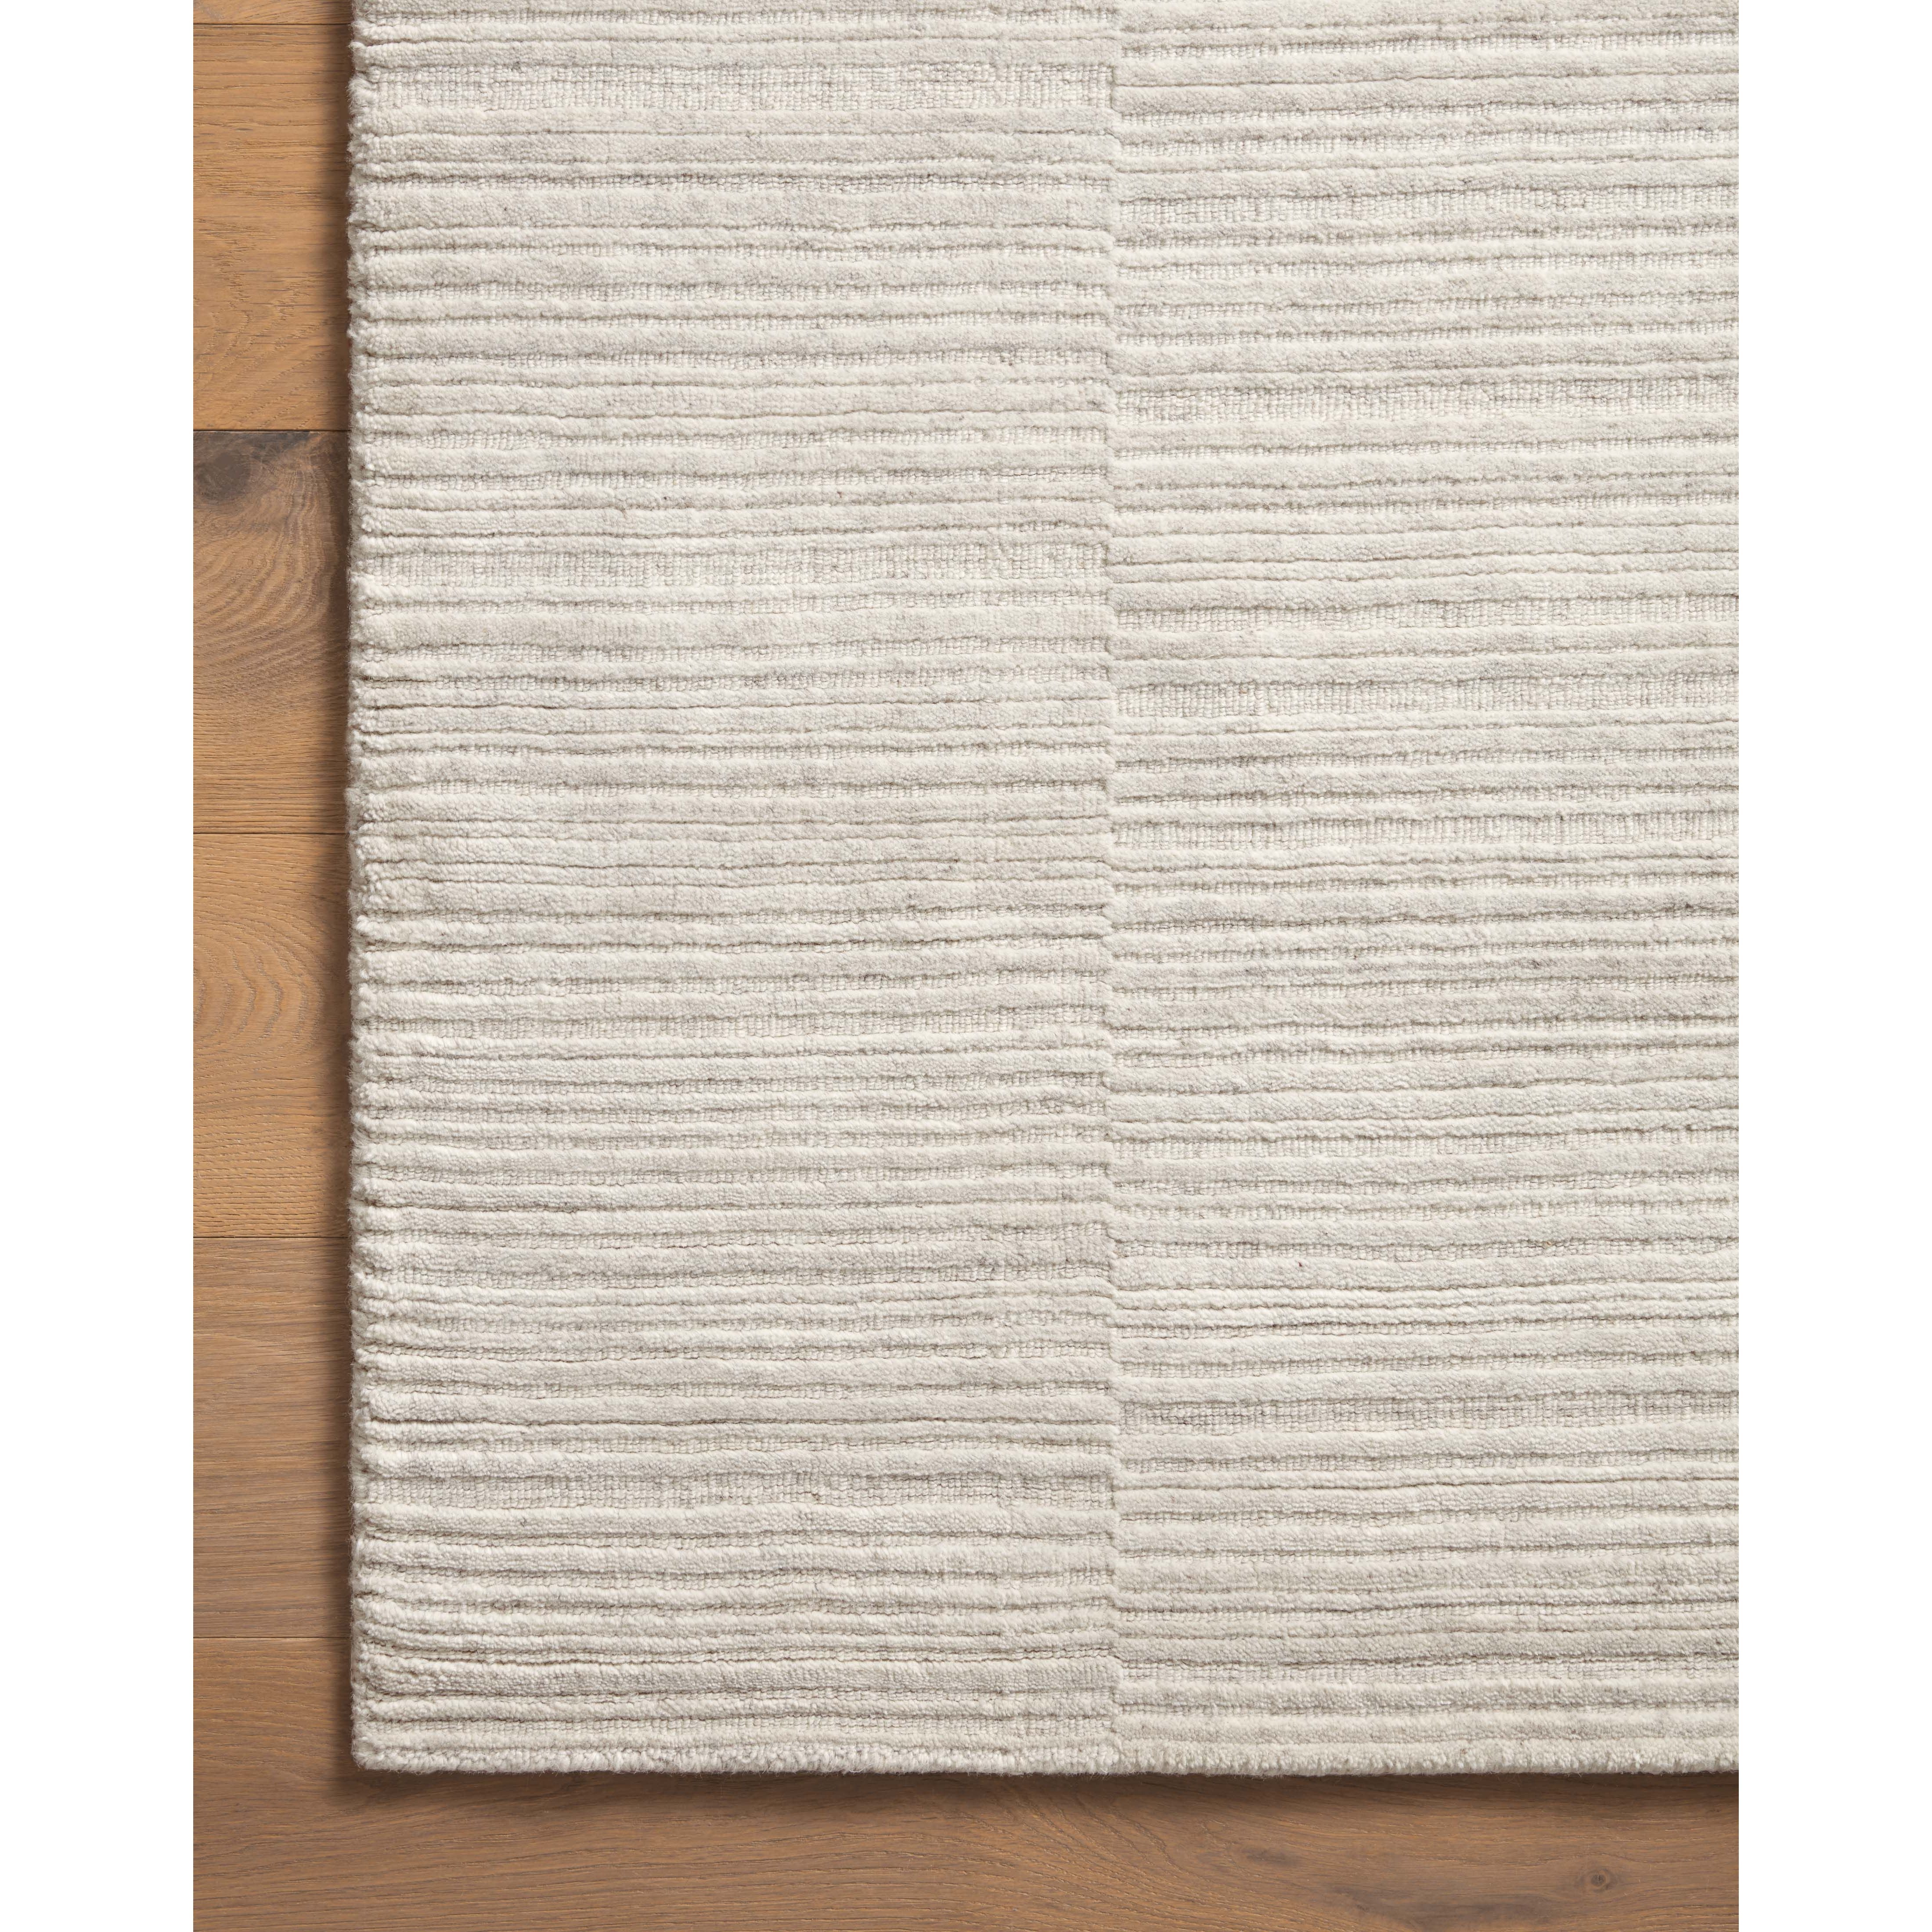 Sleek and modern, the Lou Collection is a luxurious hand-loomed area rug by Amber Lewis x Loloi. While the rug presents a minimal aesthetic, up close, it has a broken stripe pattern that creates a slightly ribbed effect. It’s made with a blend of wool and viscose that’s soft and durable, an elevated neutral for any room. Amethyst Home provides interior design, new home construction design consulting, vintage area rugs, and lighting in the Park City metro area.